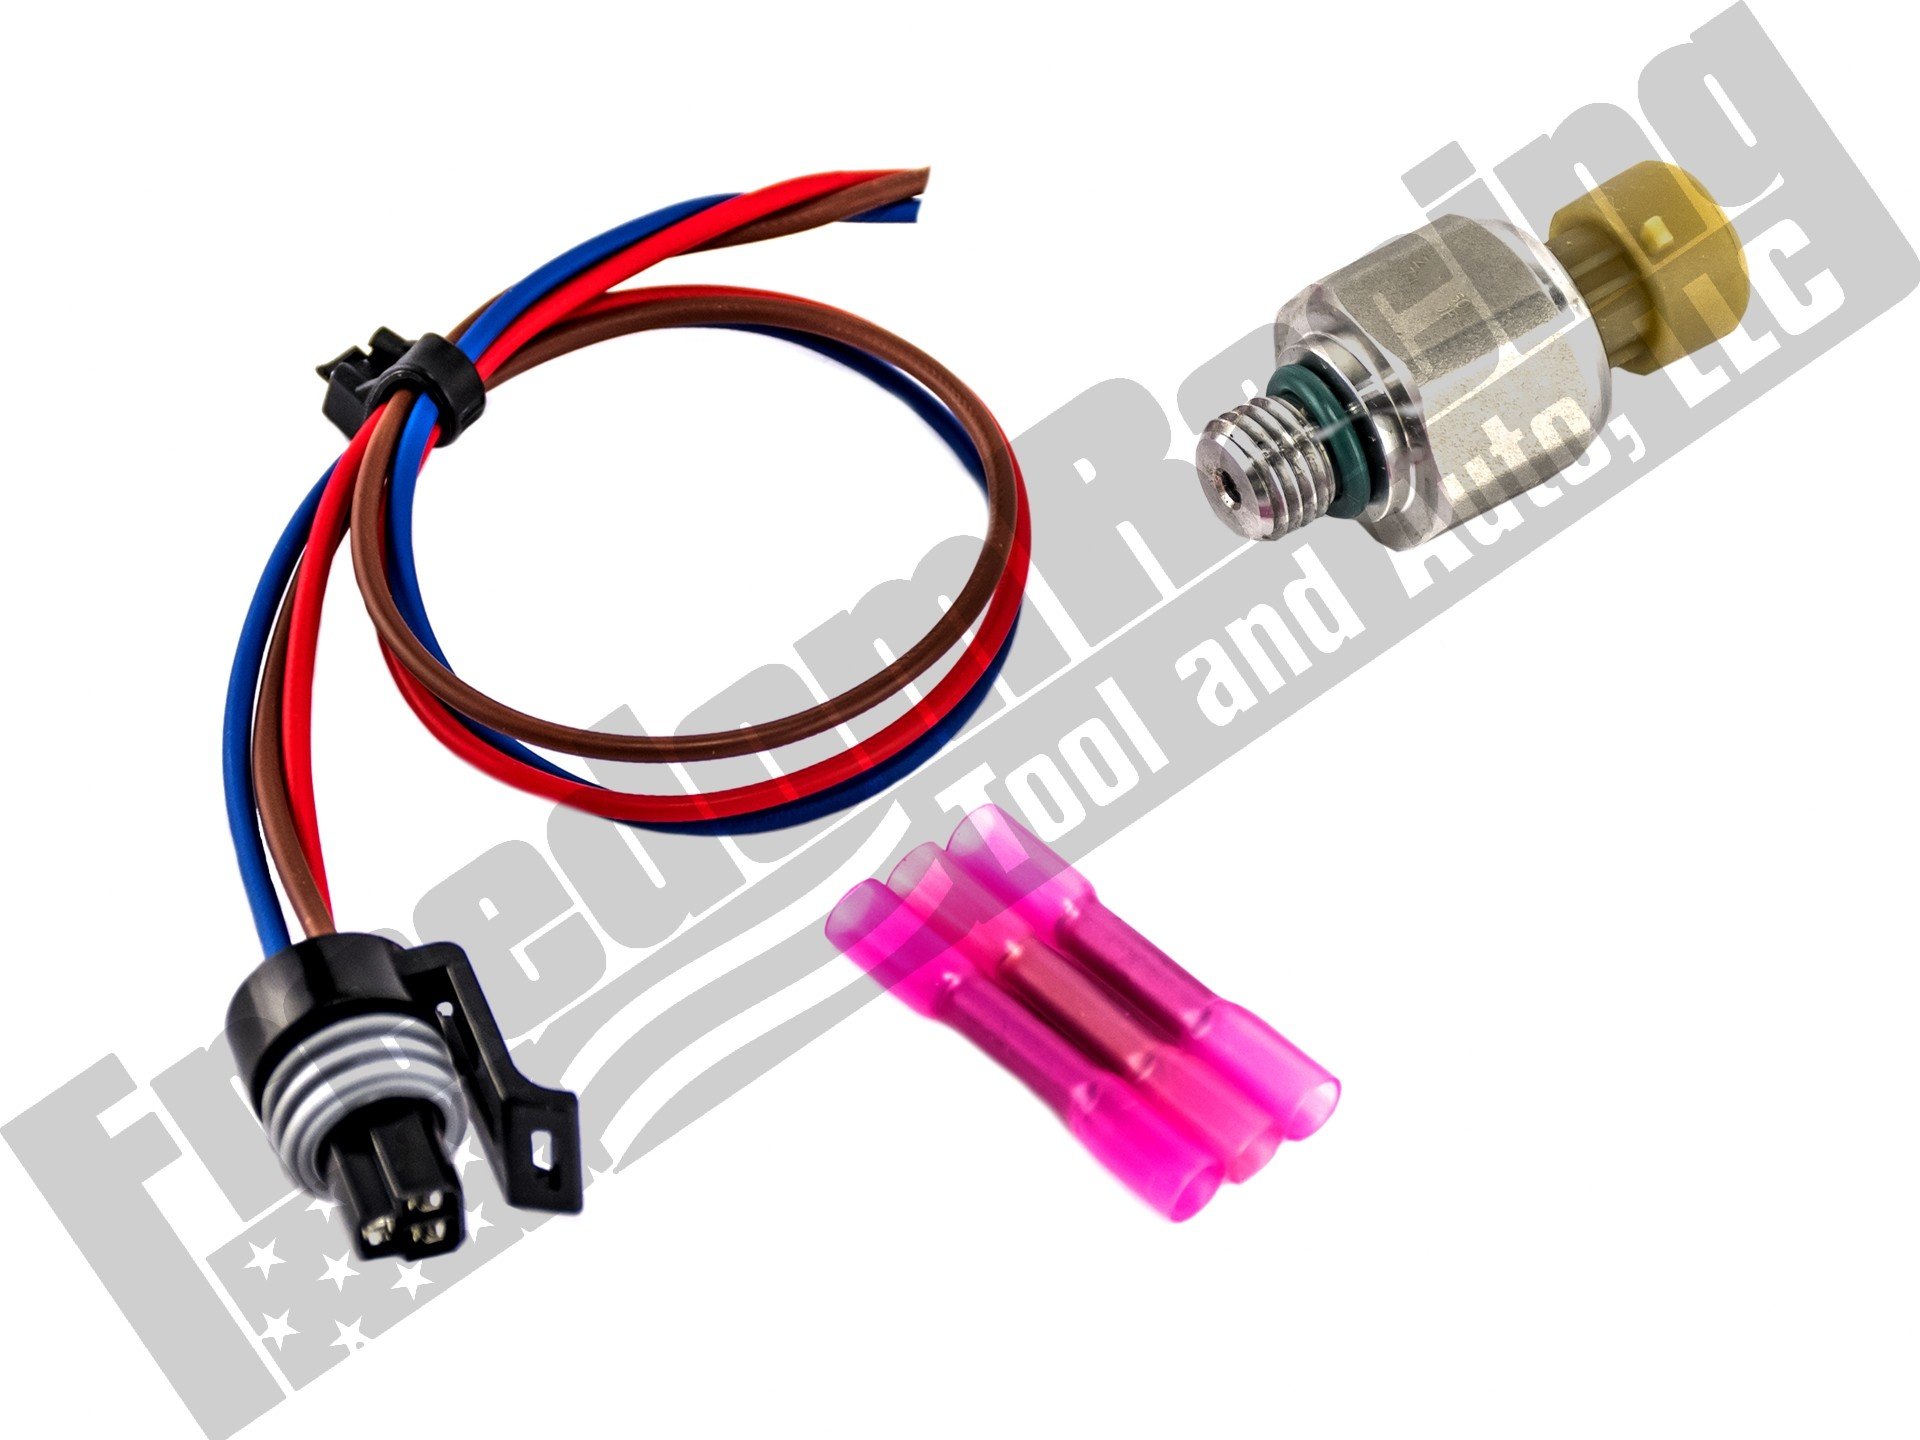 HIgh Quality Control Pressure ICP Sensor for Ford 7.3 7.3L Powerstroke Pigtail